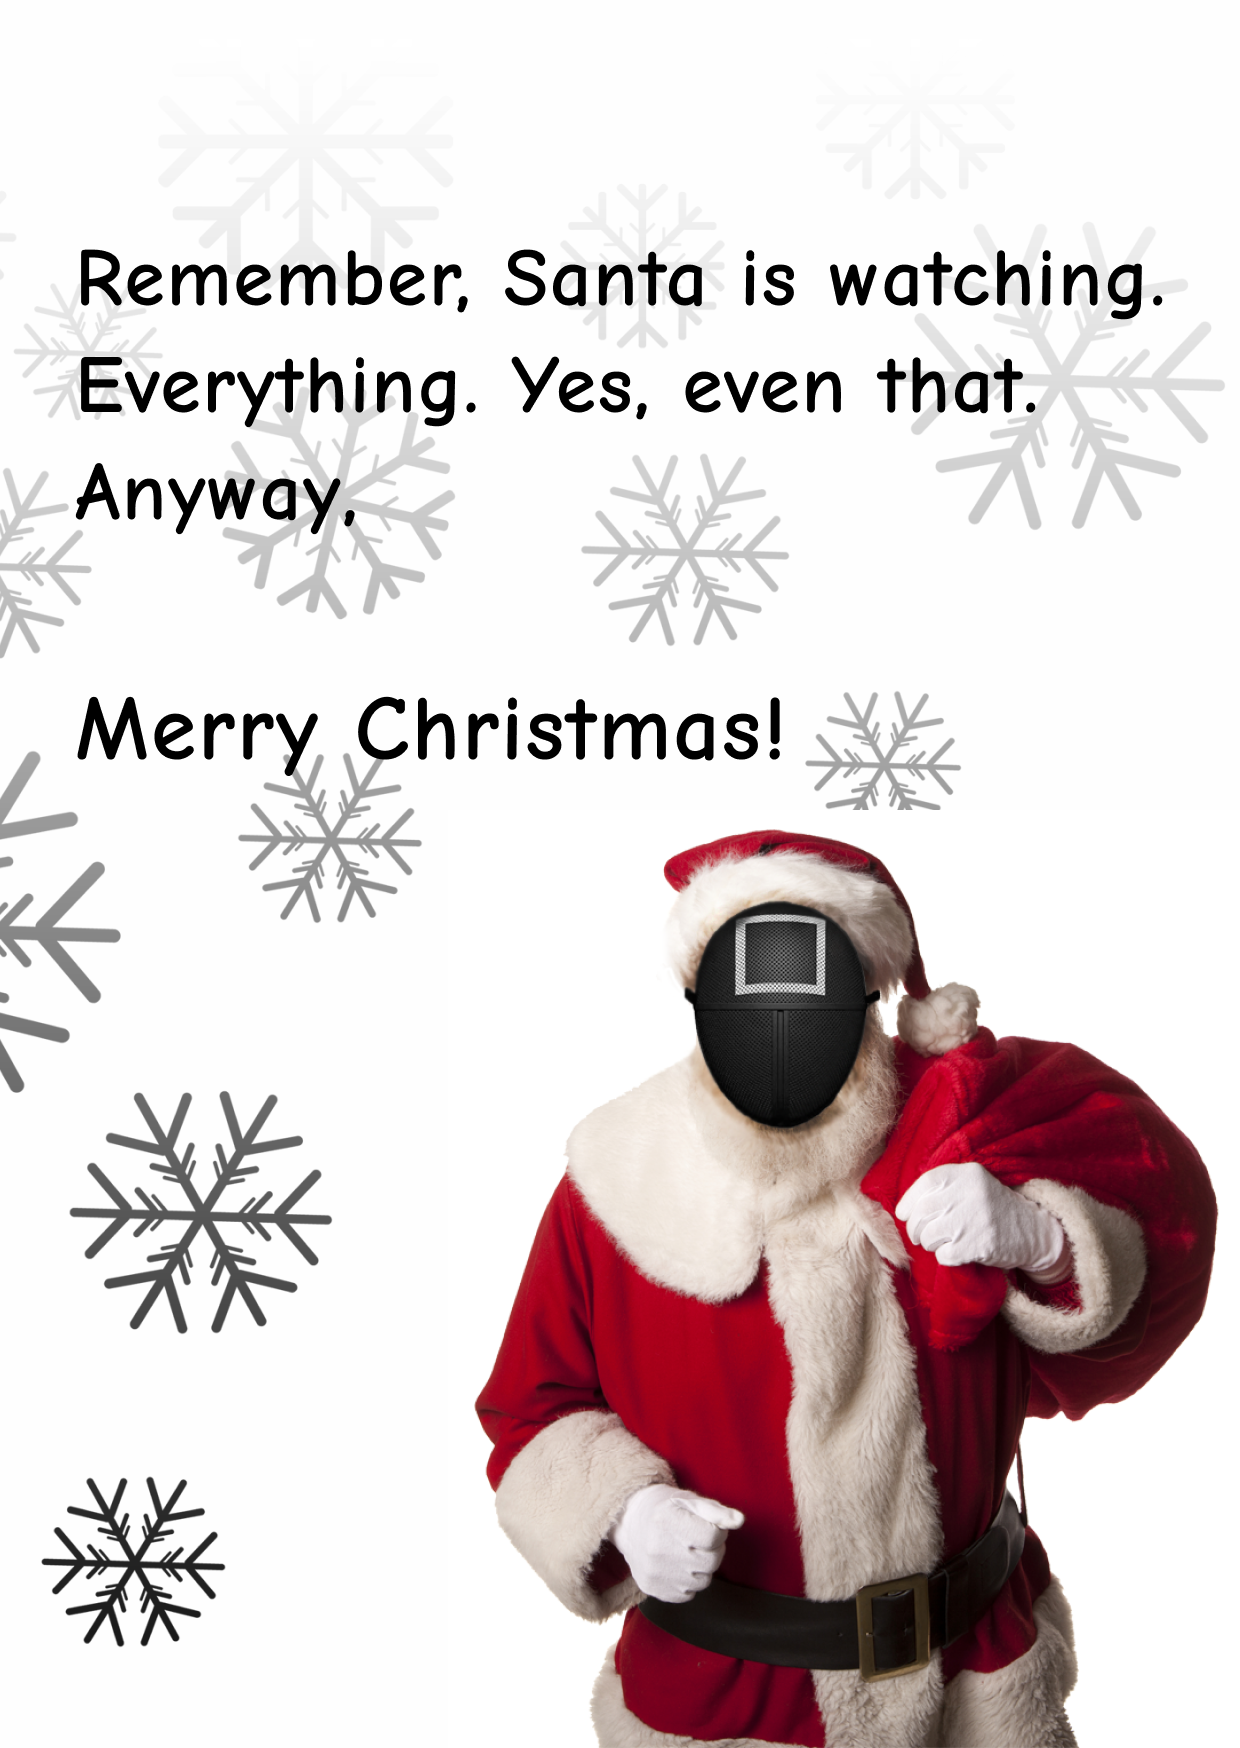 santa is watching preview.